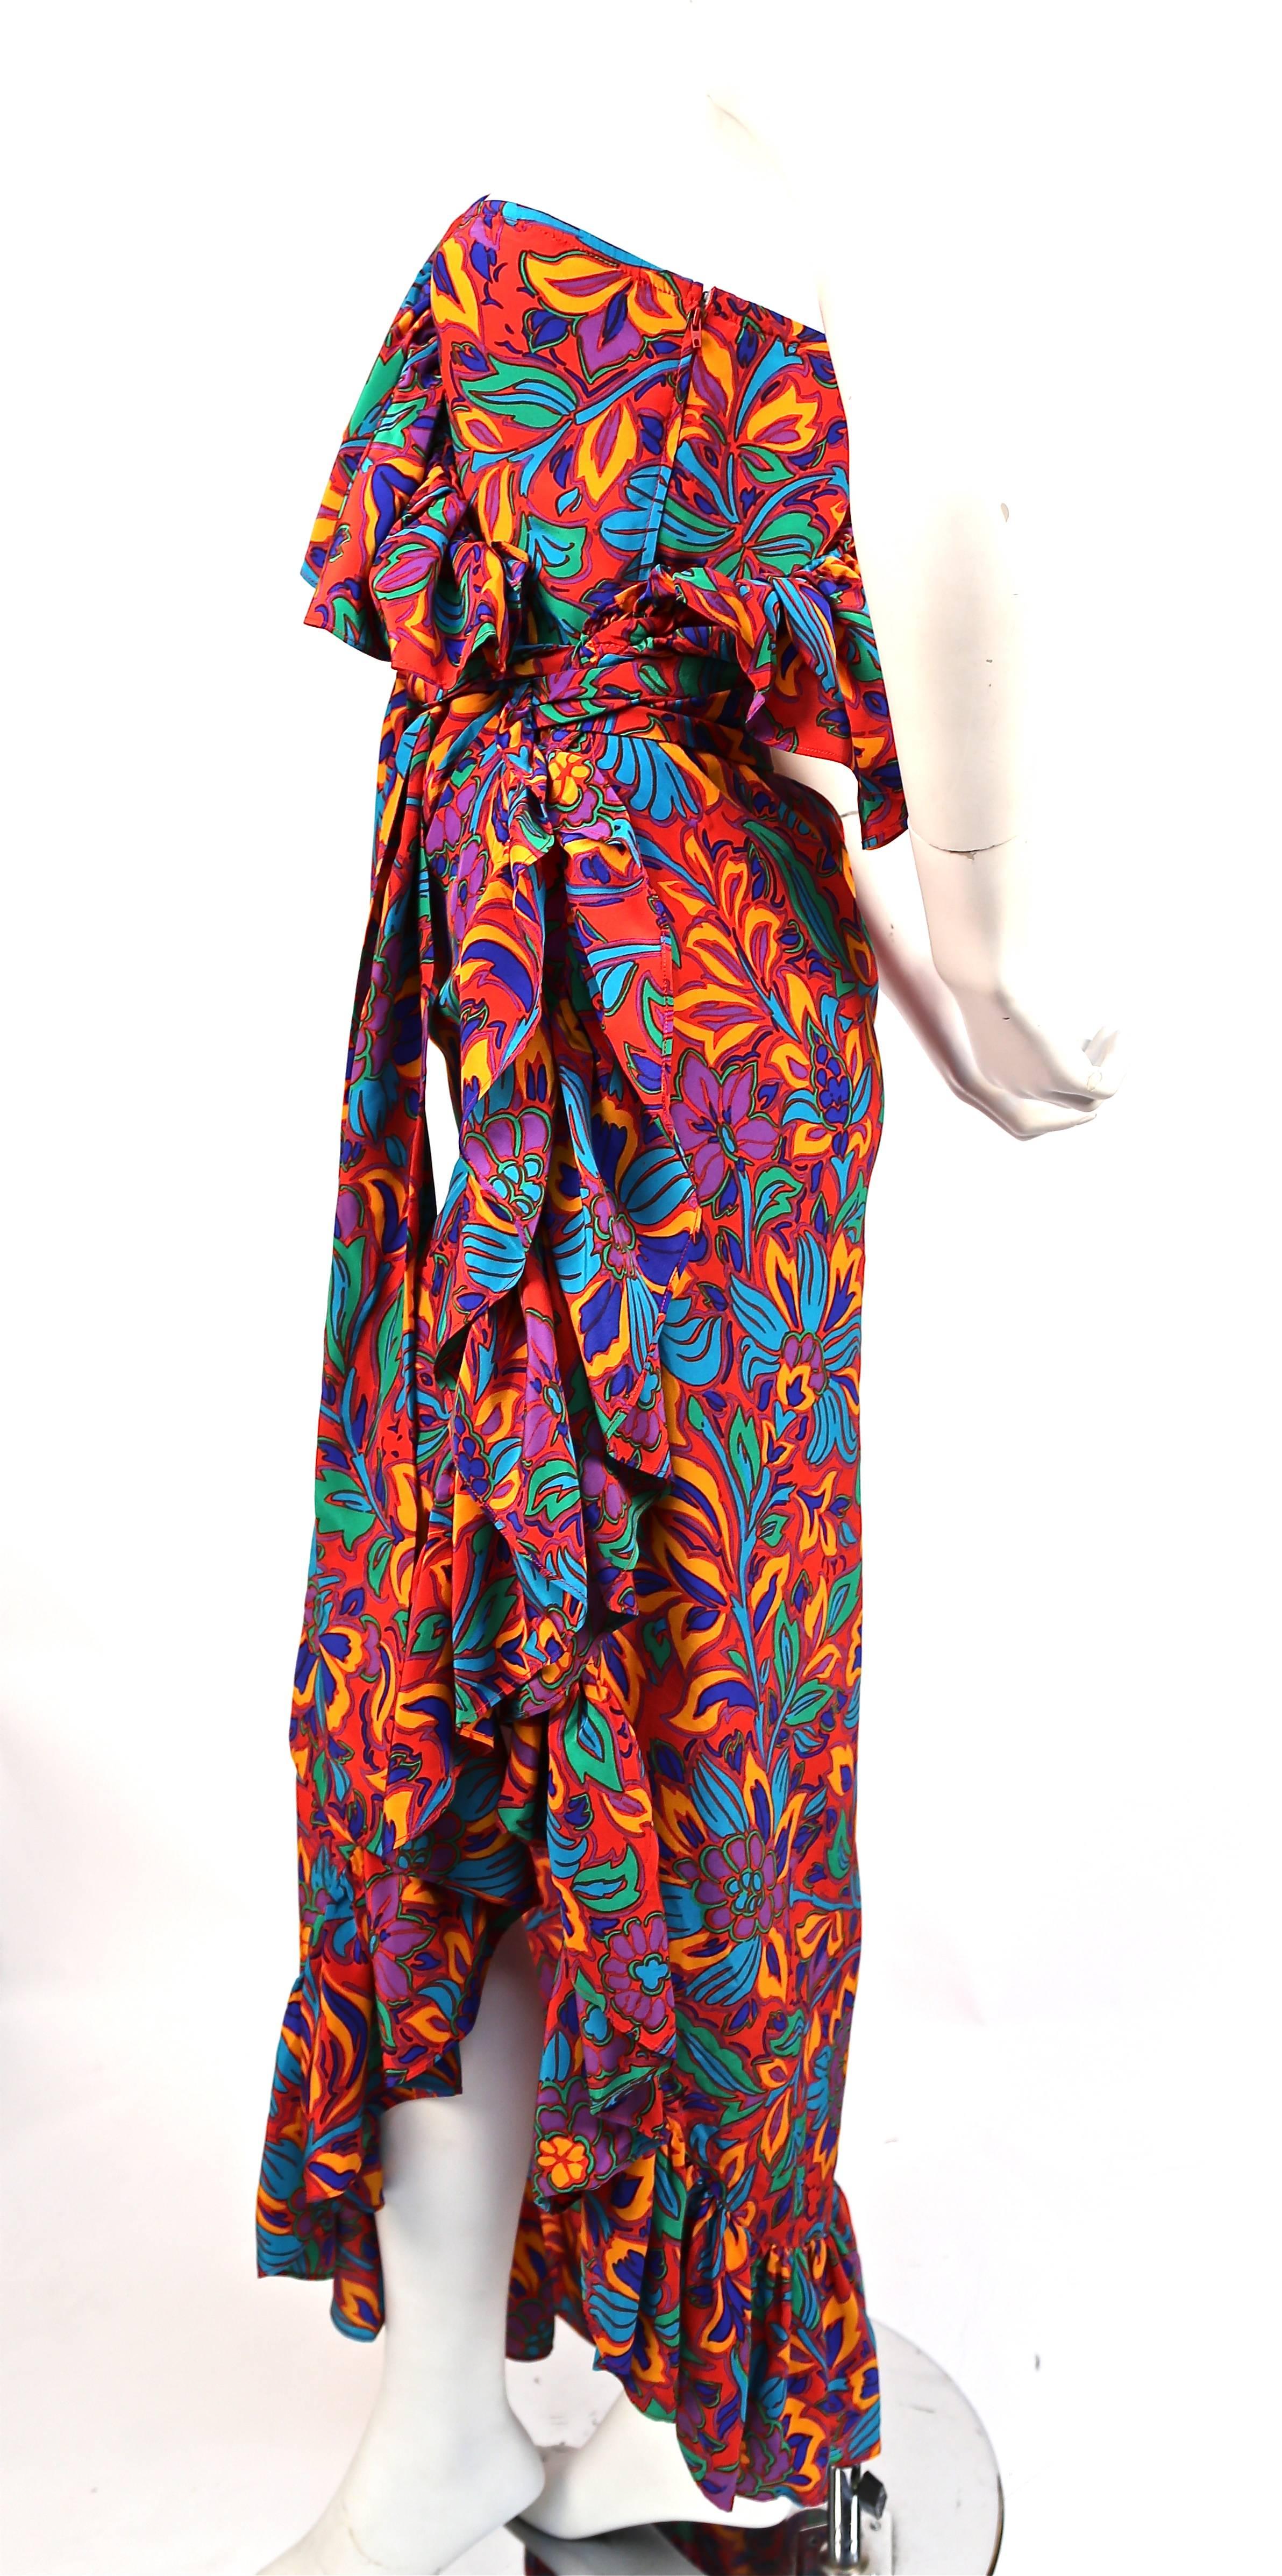 Vivid floral printed silk dress with asymmetrical shoulder and ruffled trim from Yves Saint Laurent dating to the 1970's. Self tie belt at waist. Dress is labeled a French size 34. Approximate measurements: bust unstretched is about 28